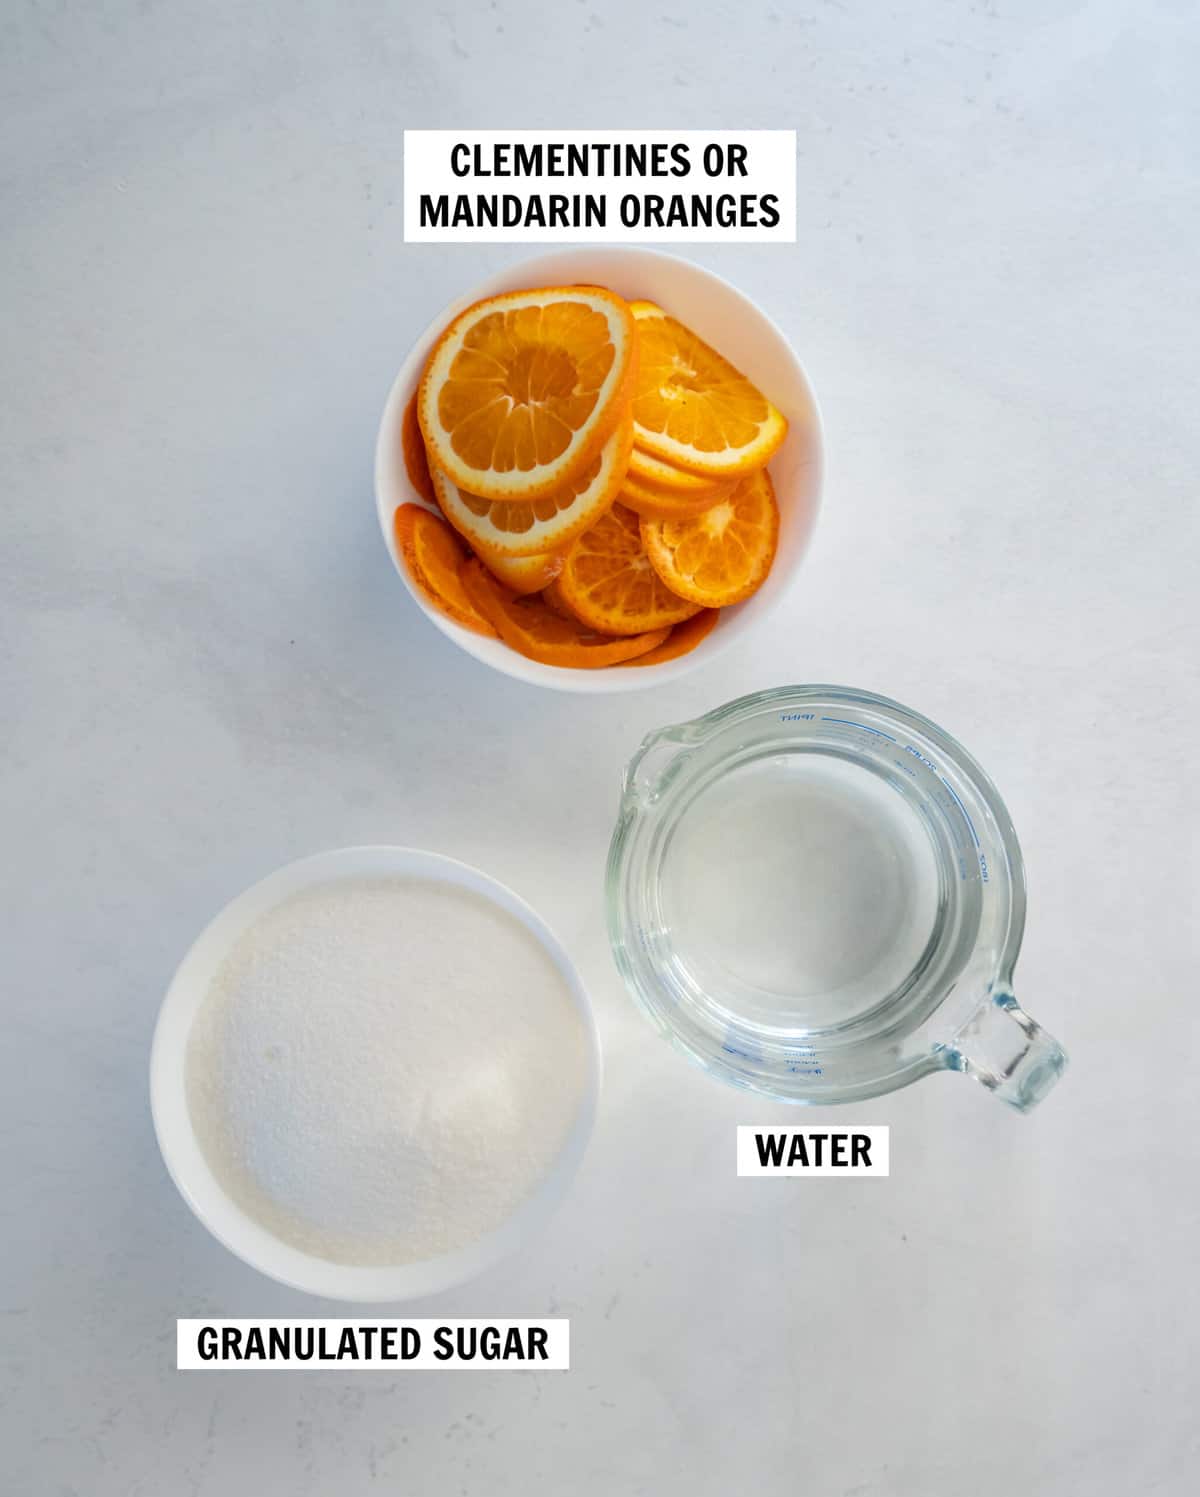 All of the ingredients for candied orange peels on a white countertop including orange slices, granulated sugar and water.